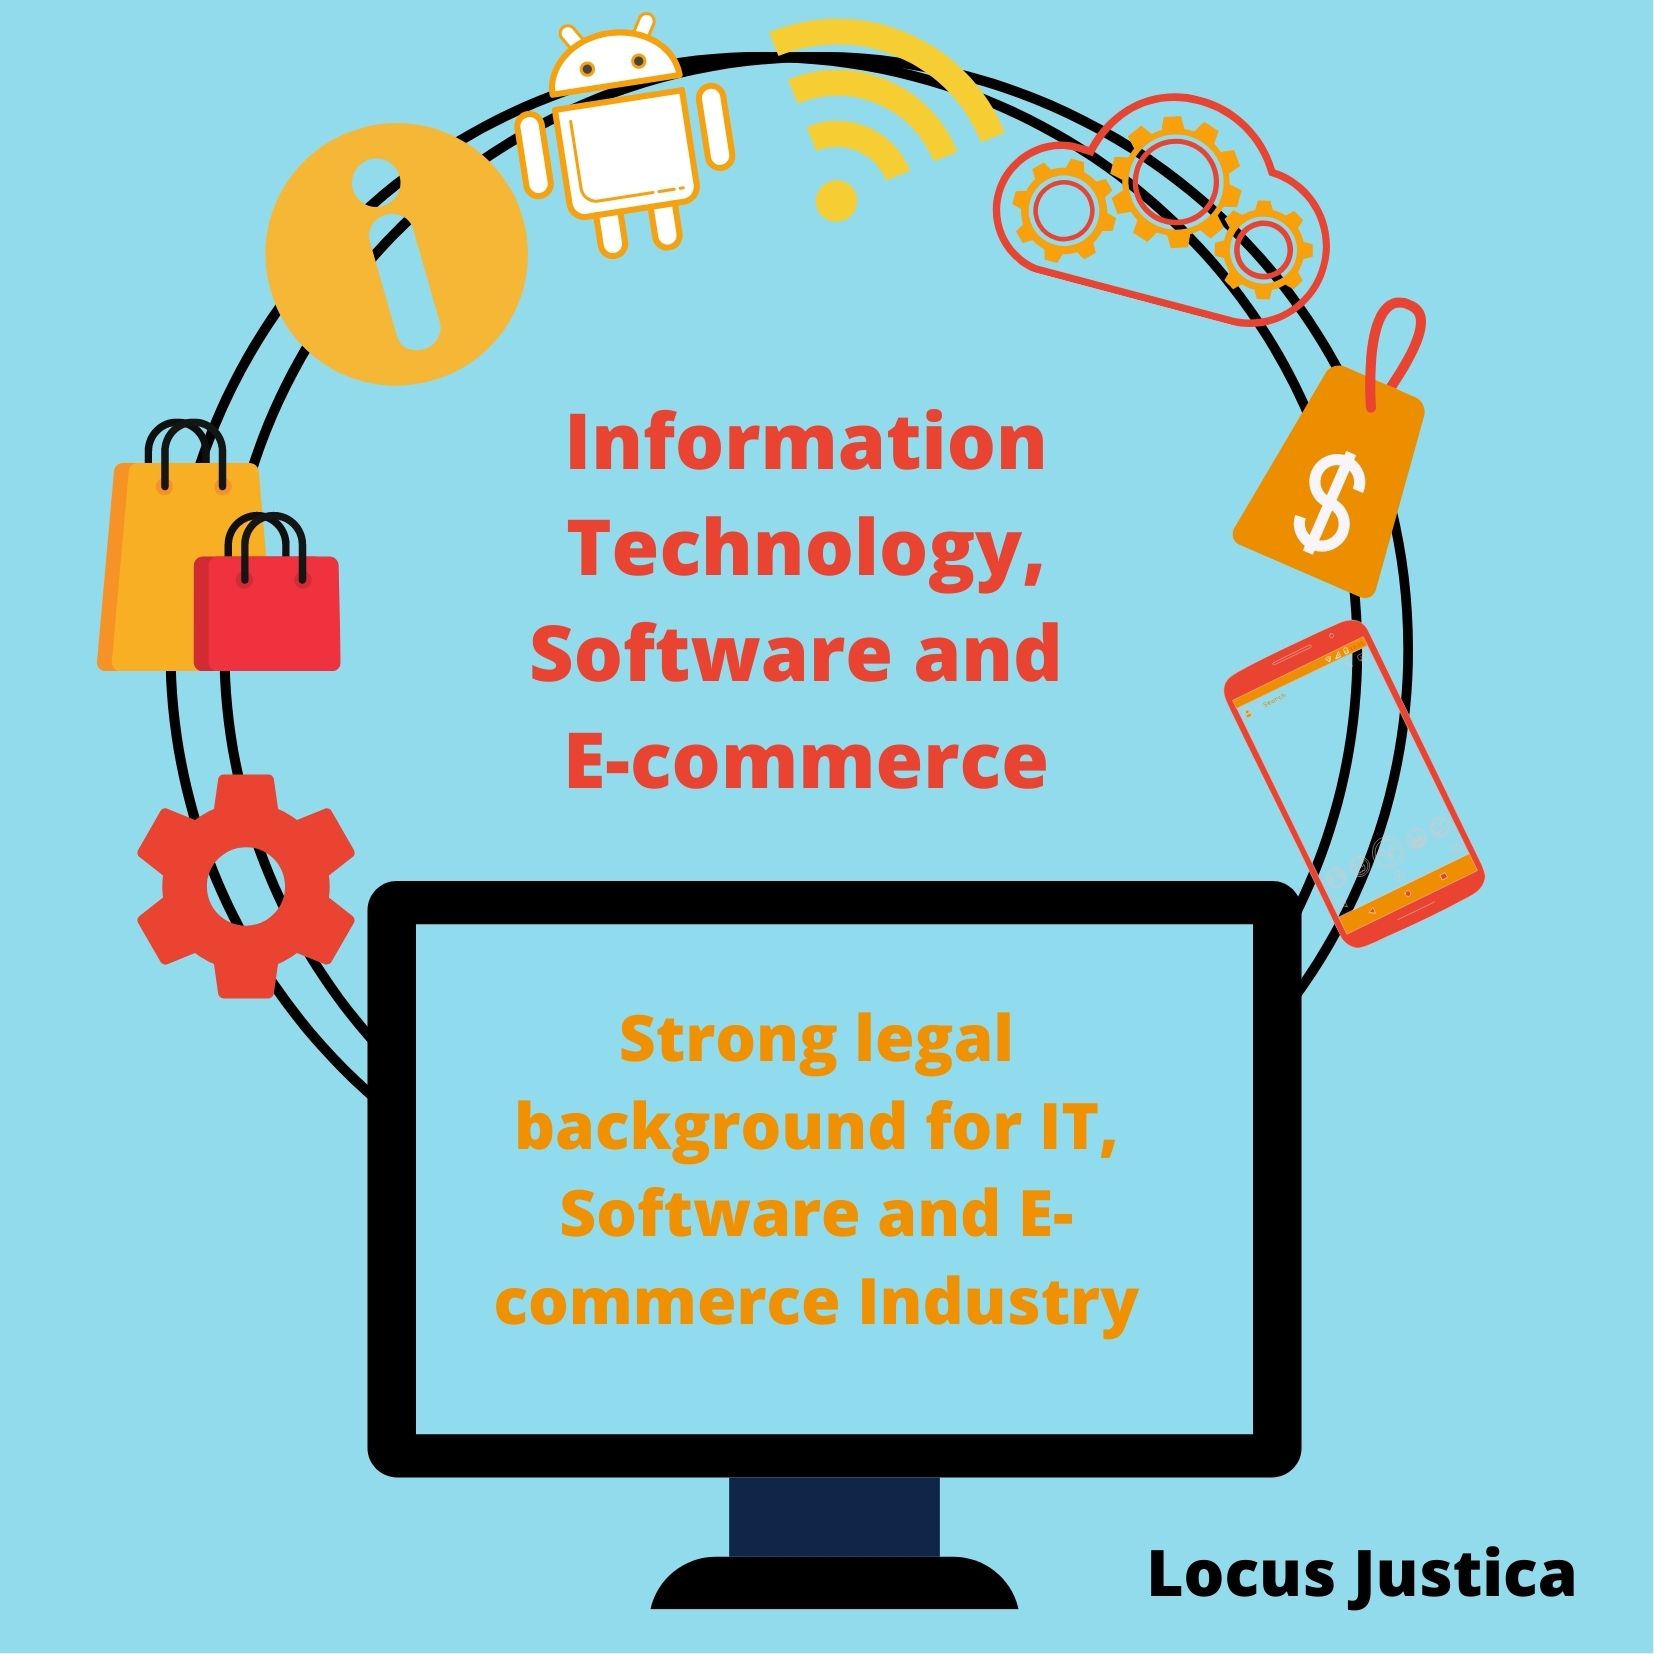 Information Technology, Software and E-commerce